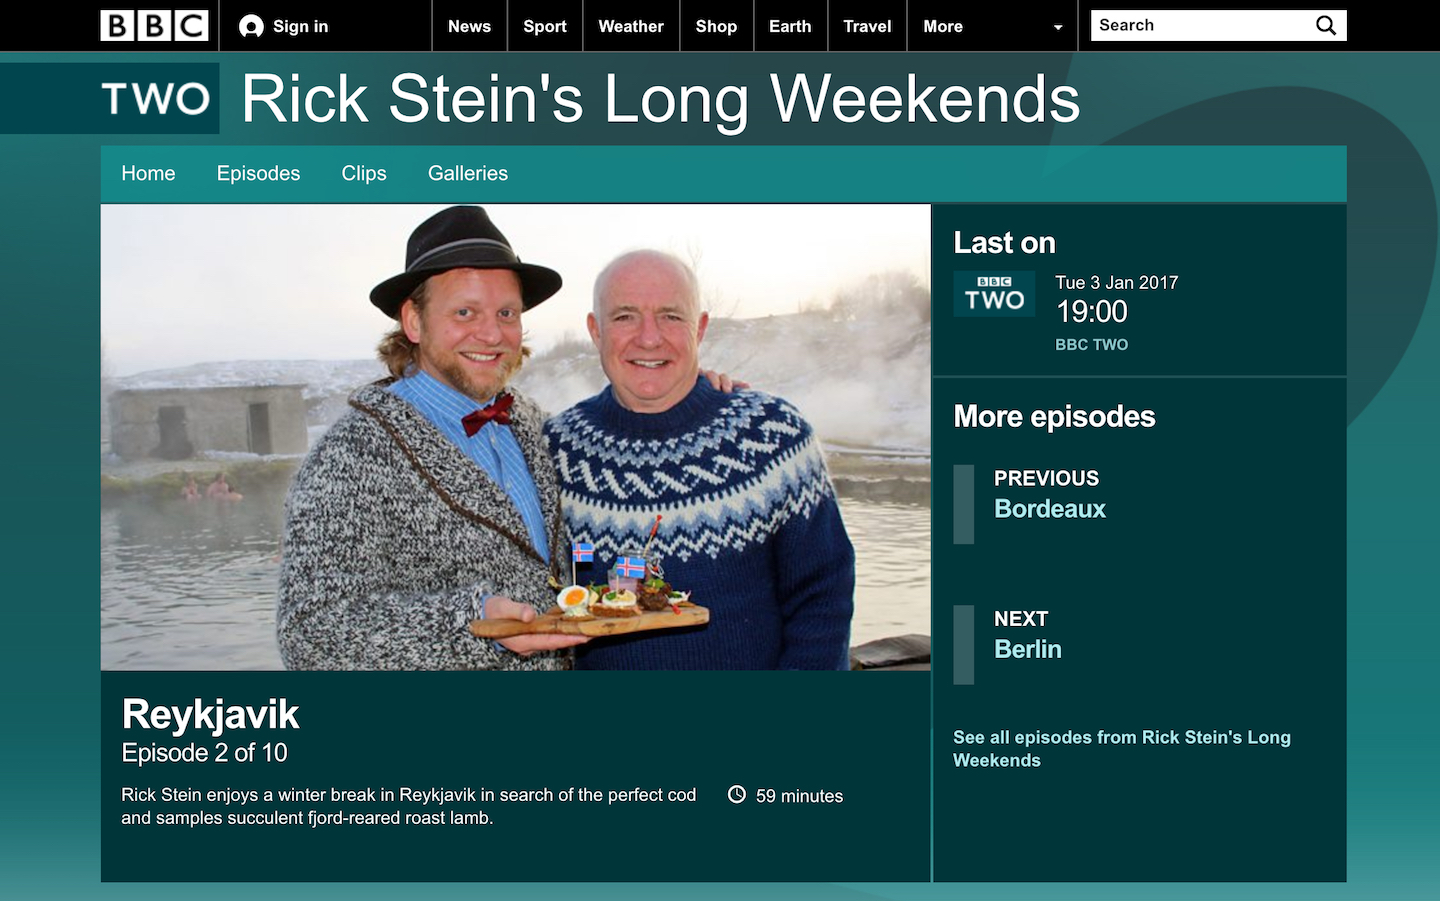 A screen shot from BBC2's Rick Stein's Long Weekend showing Magical Iceland's Ýmir with Rick Stein